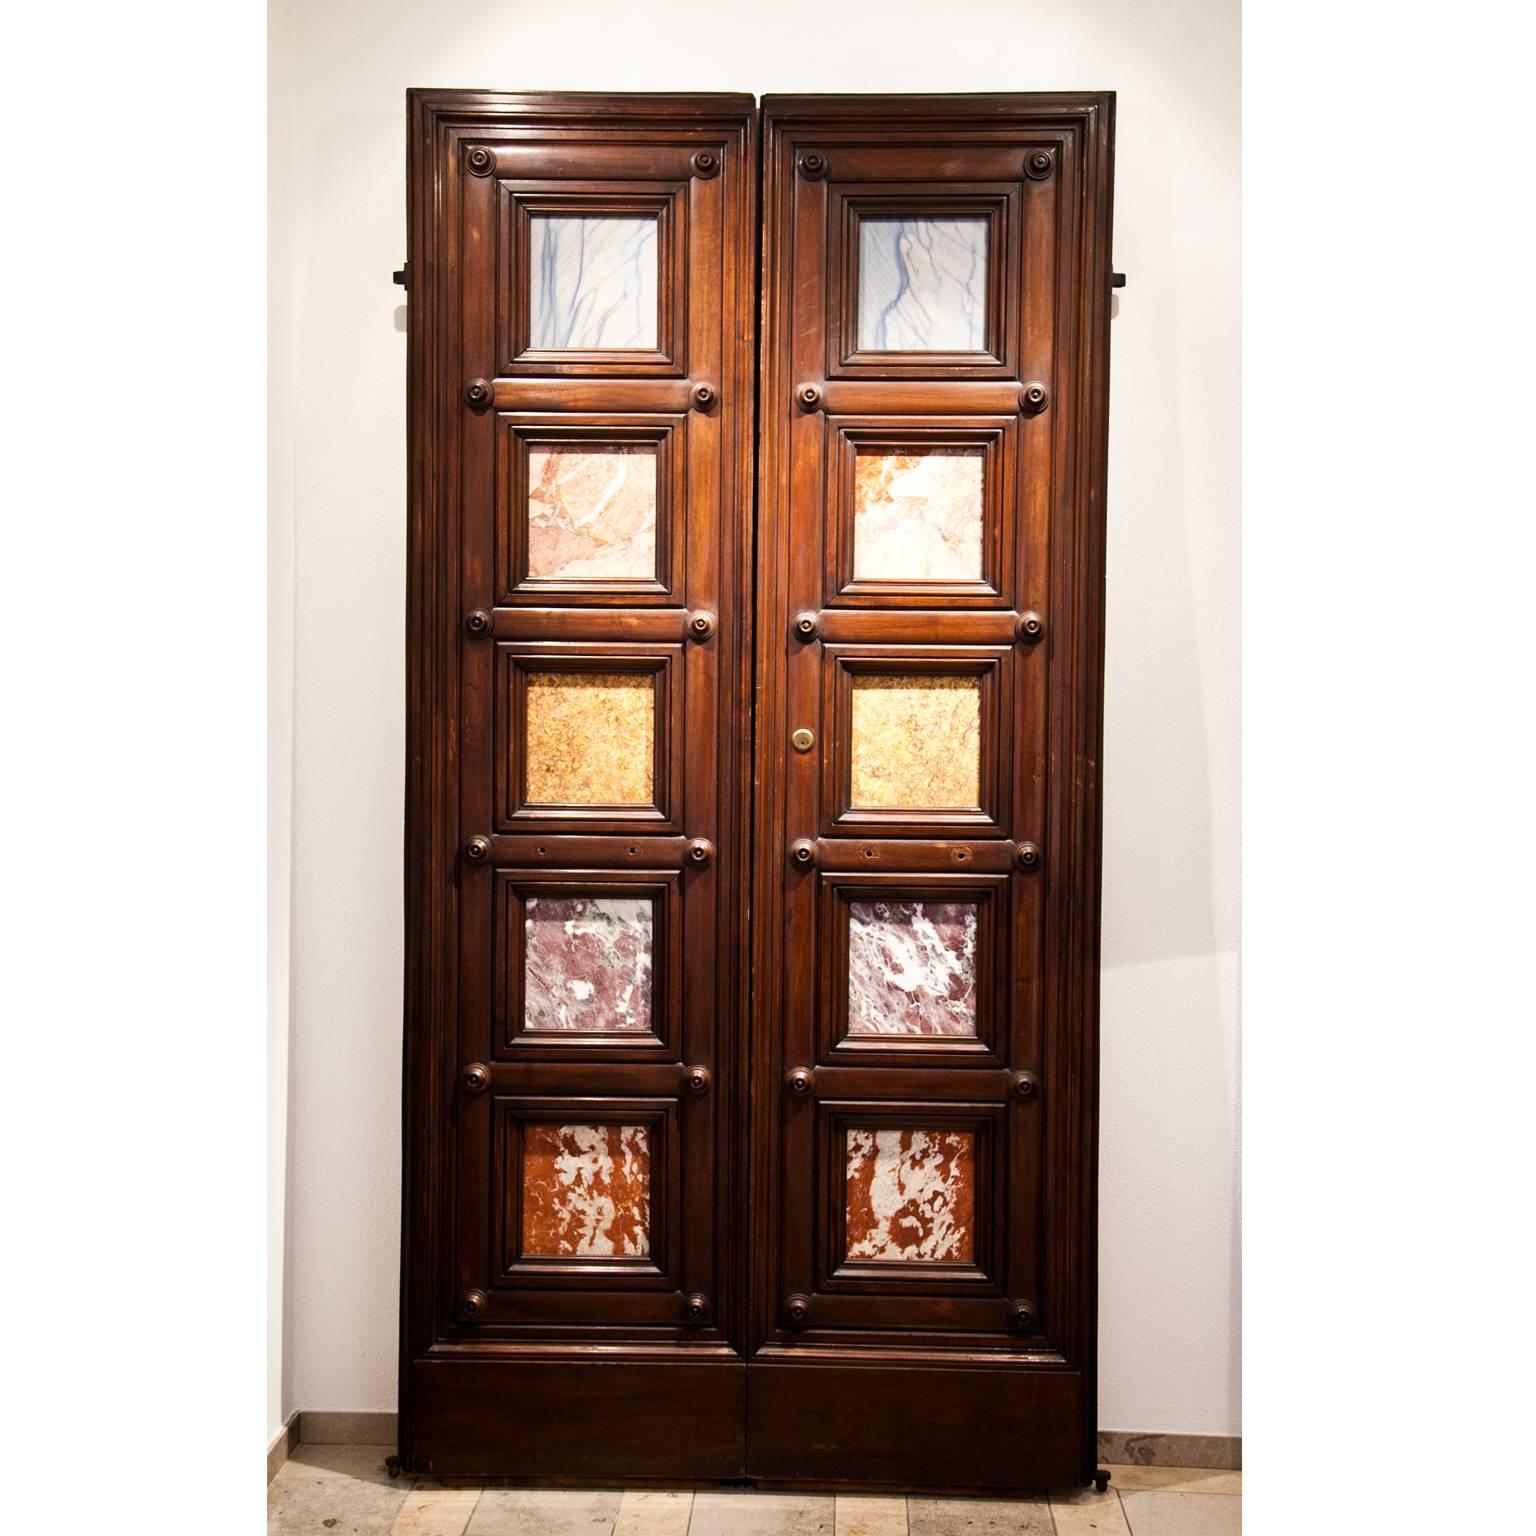 Unusual double-door out of solid carved wood with marble fillings in different colors.